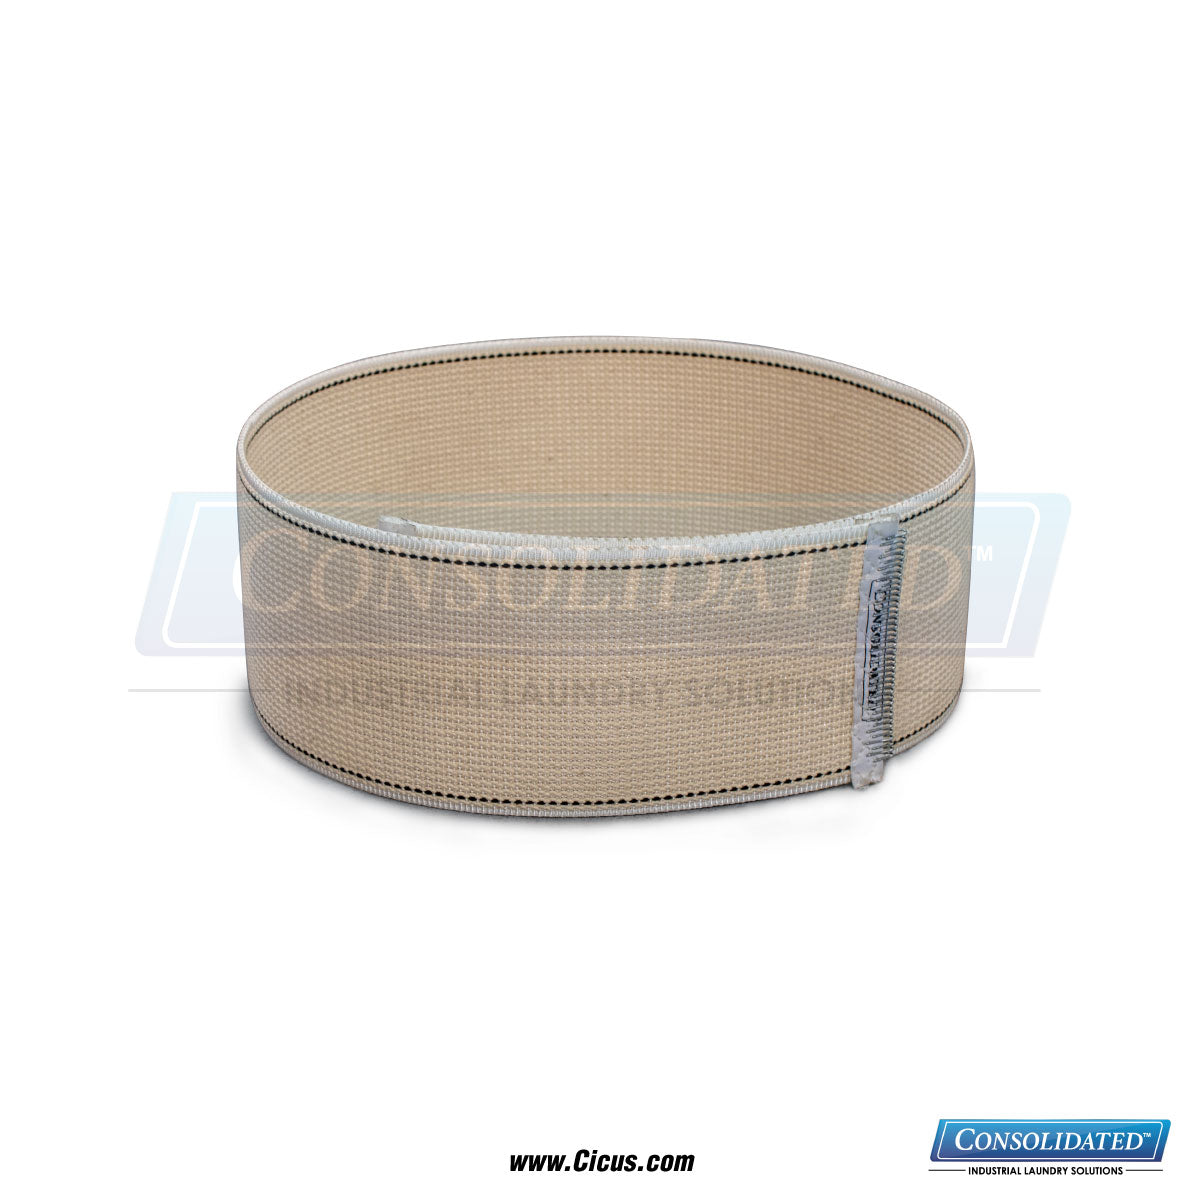 CIC Exclusive Chicago Dryer Canvas Ribbon - 10" x 290" [1001-031]